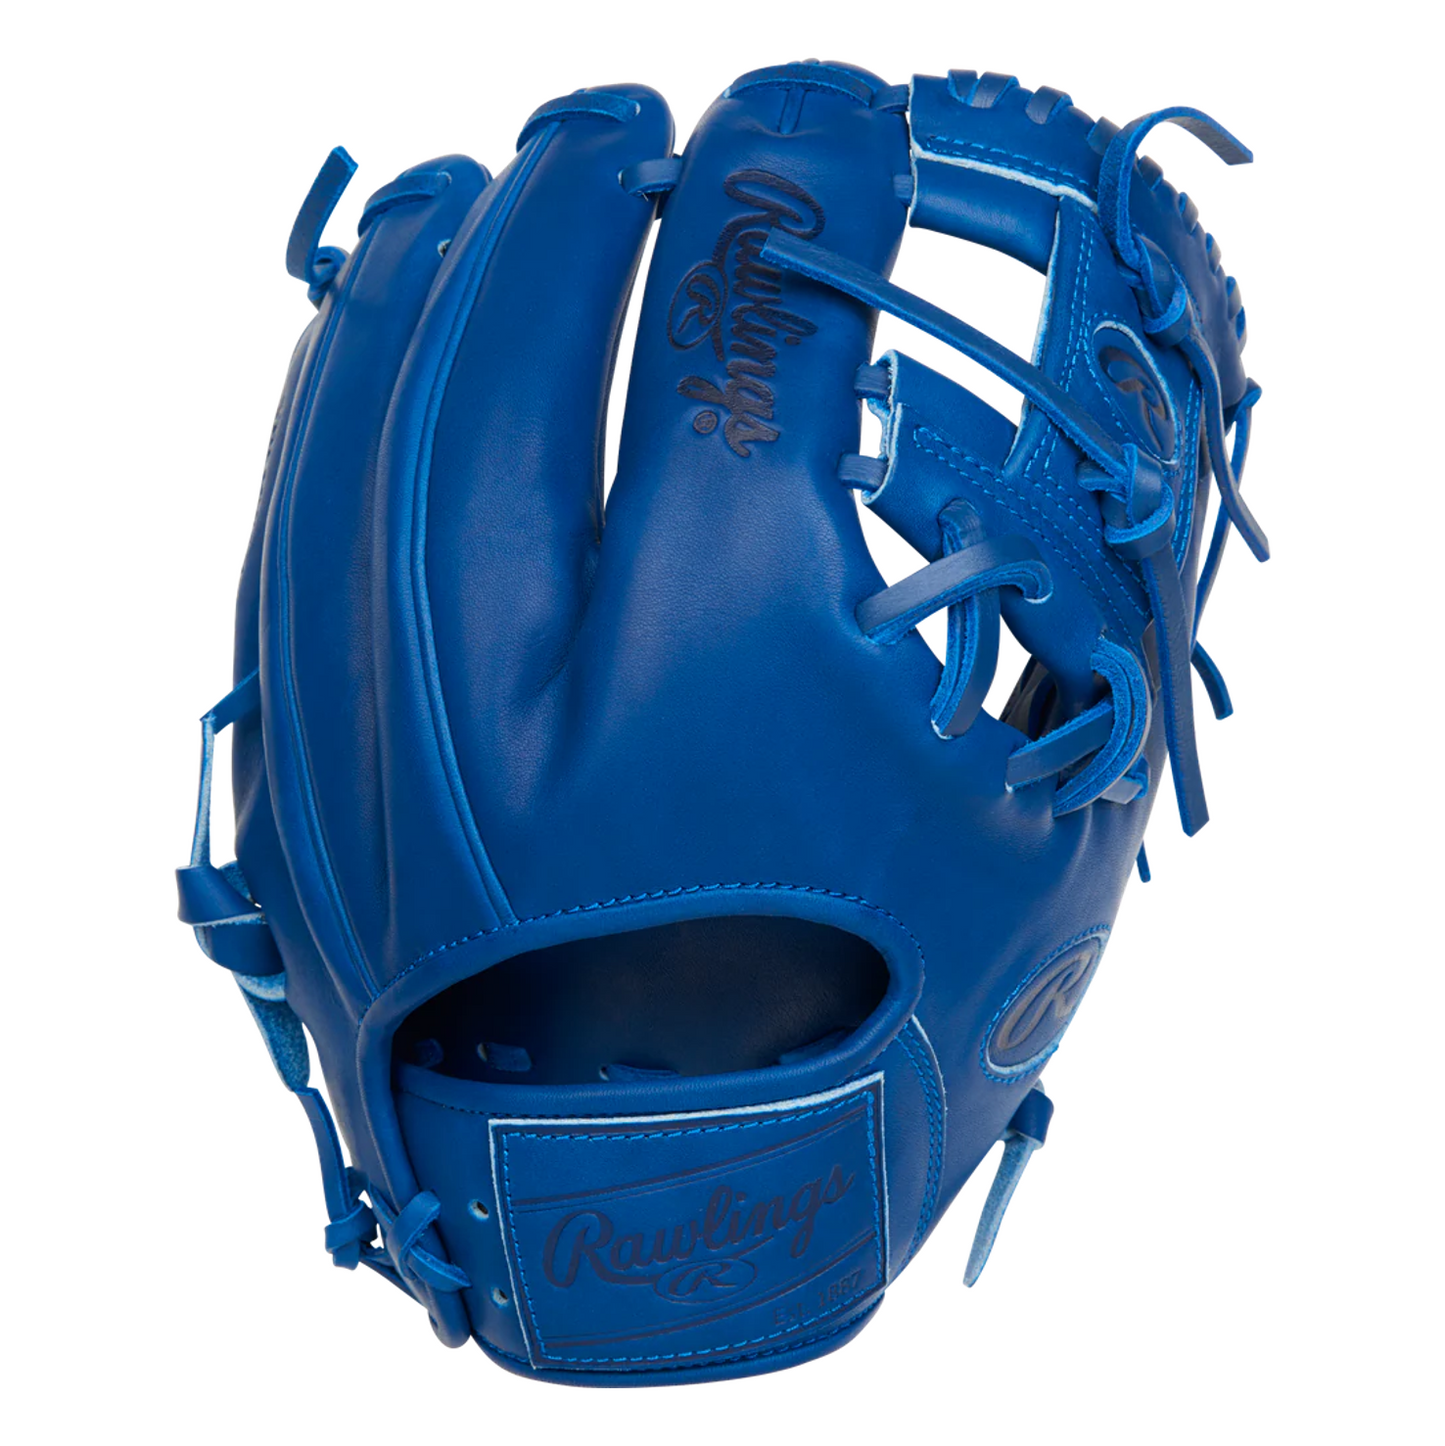 HEART OF THE HIDE ELEMENTS STORM RPRO204-2R 11.5" BASEBALL GLOVE 